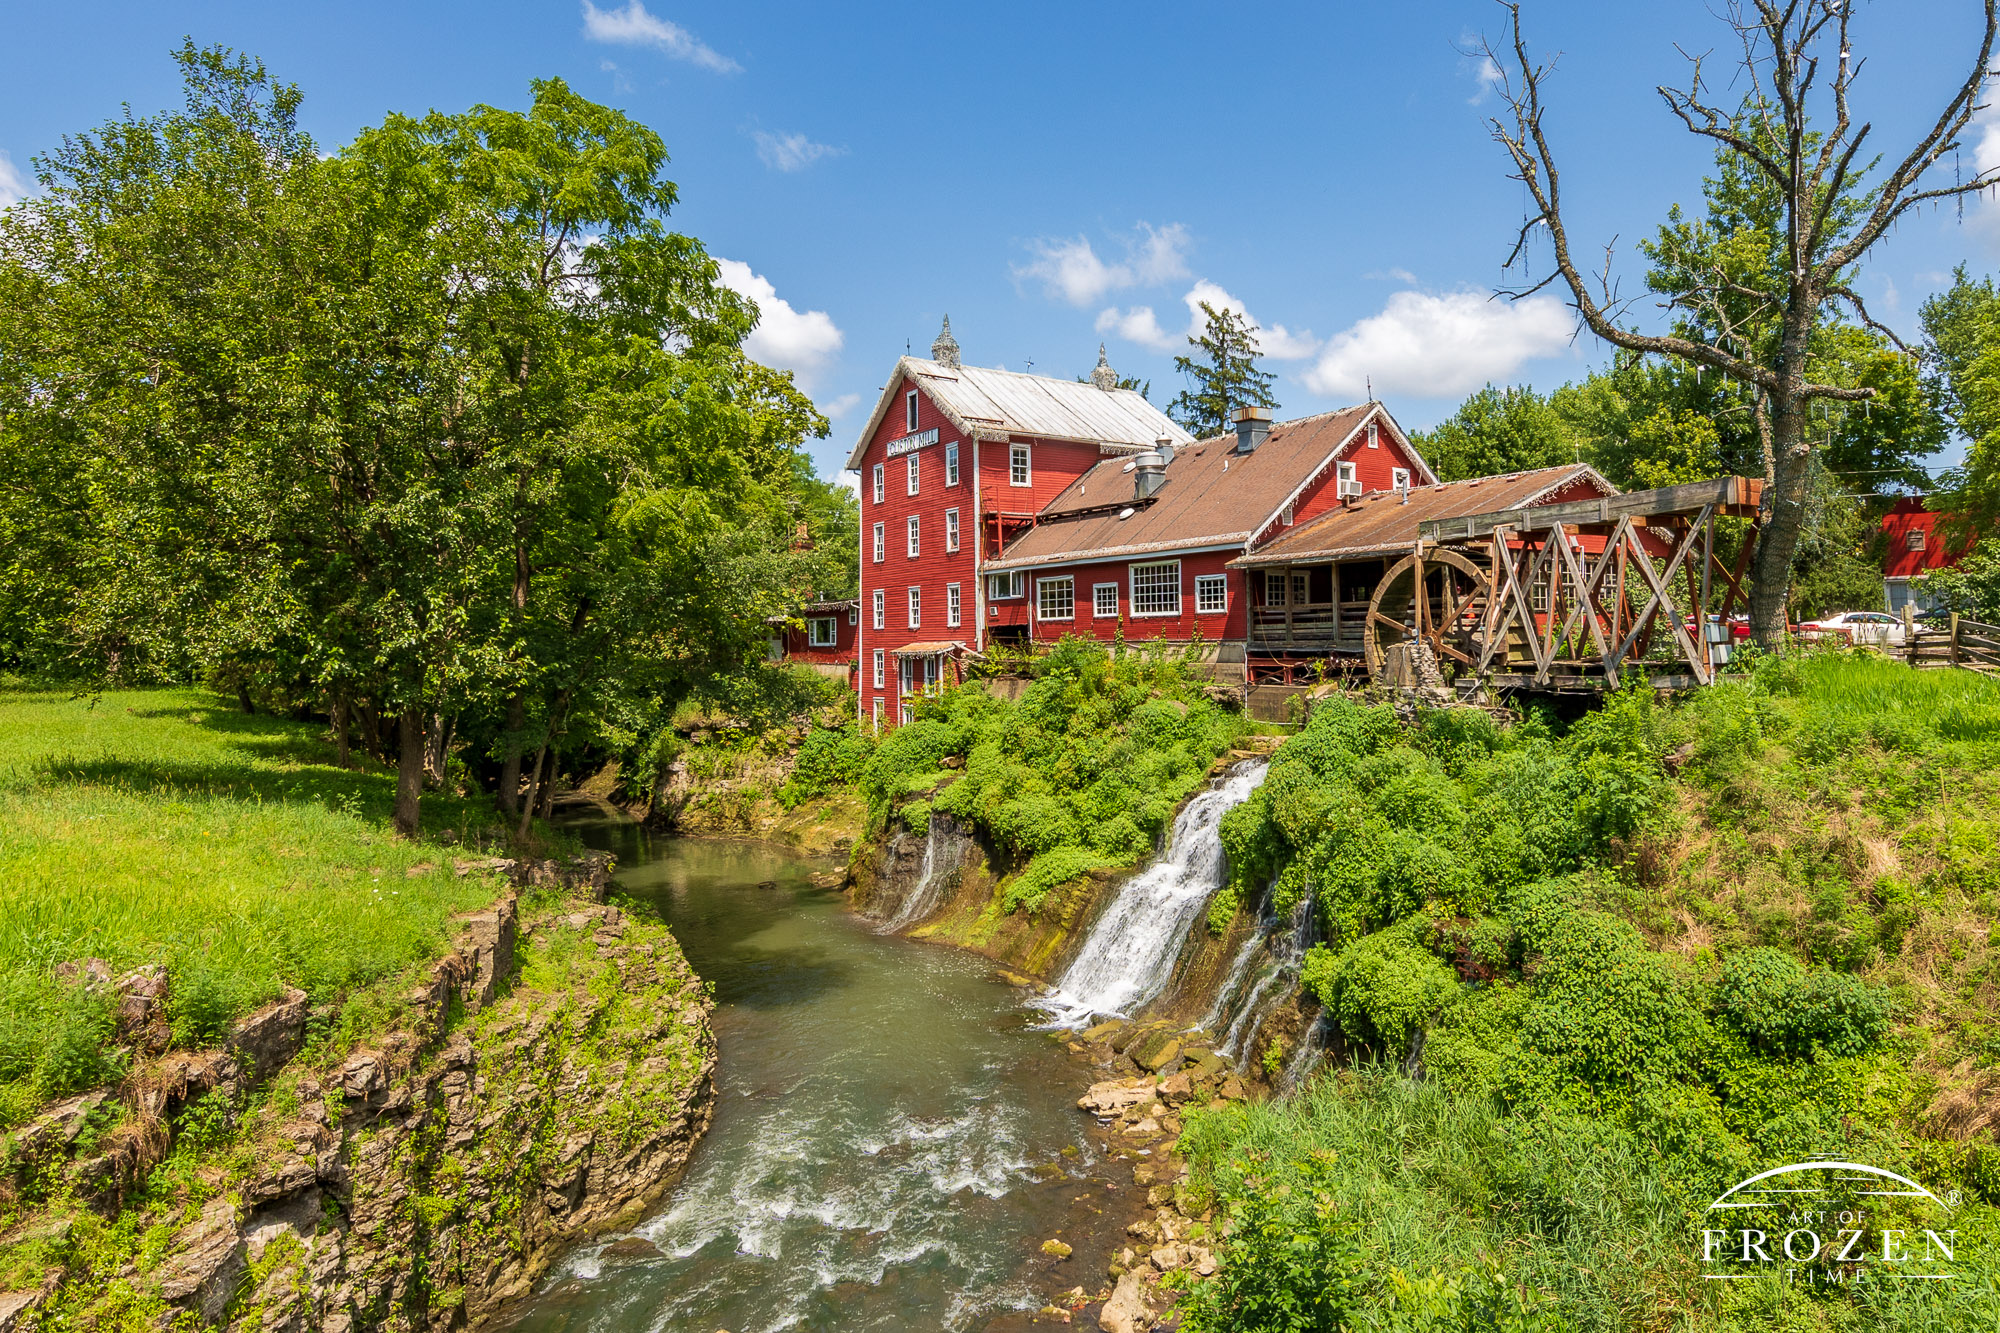 As the Little Miami River powers this grist mill, the red exterior, green plants and blue skies form complementary colors in a classic Ohio scene